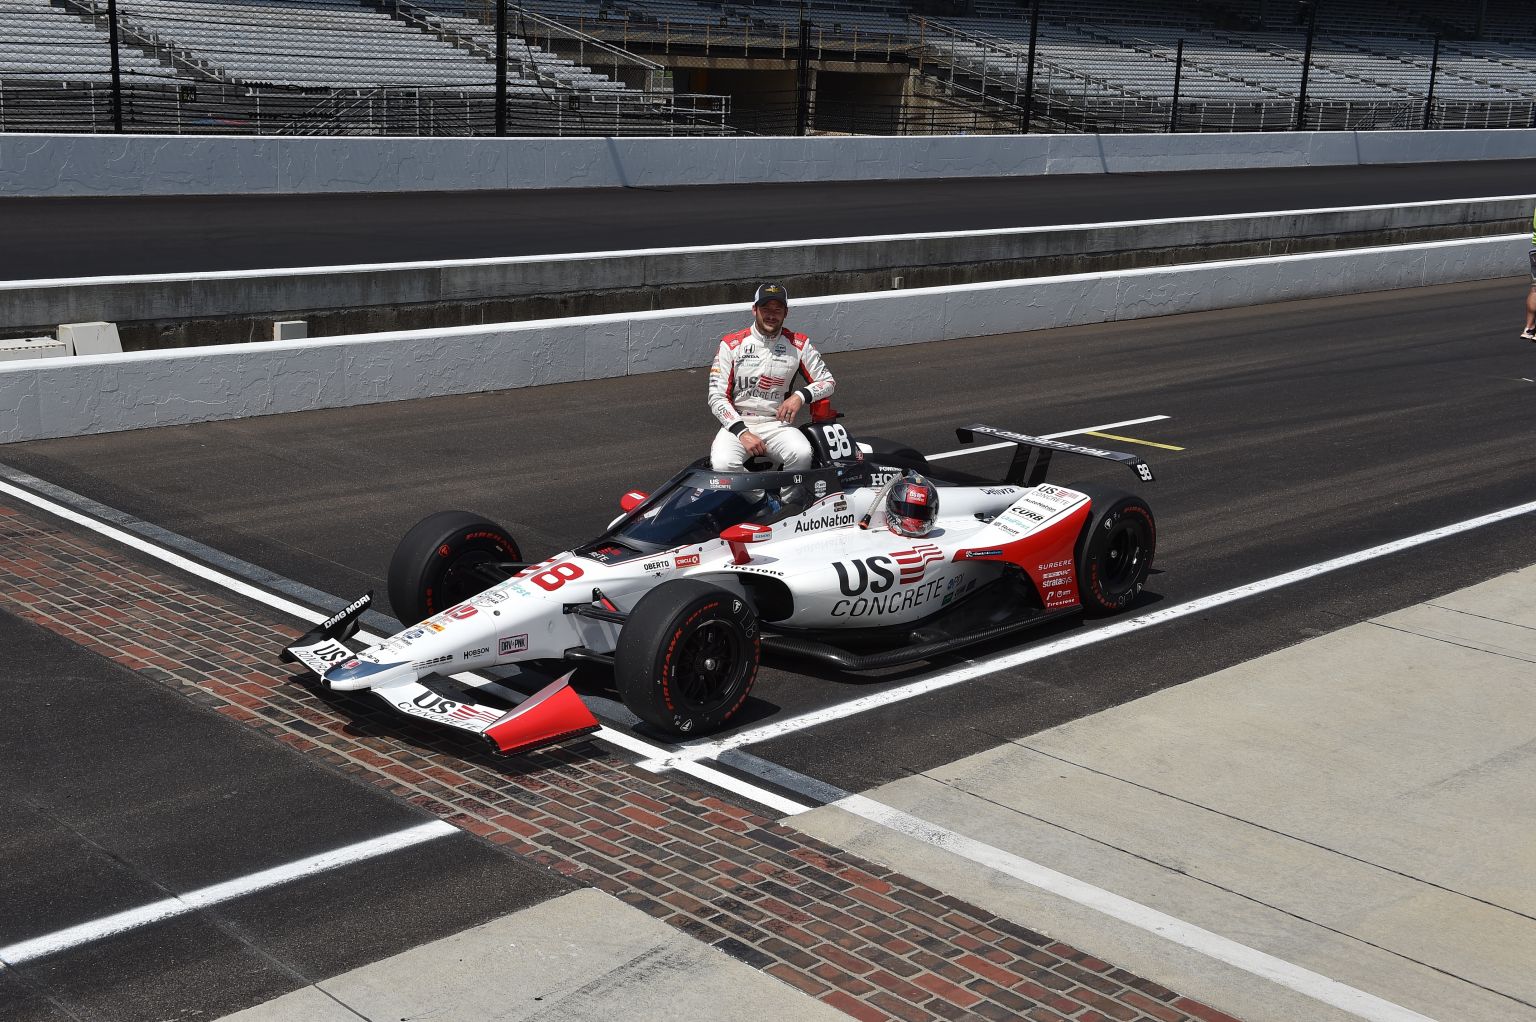 Marco Andretti seals incredible first Indy 500 pole